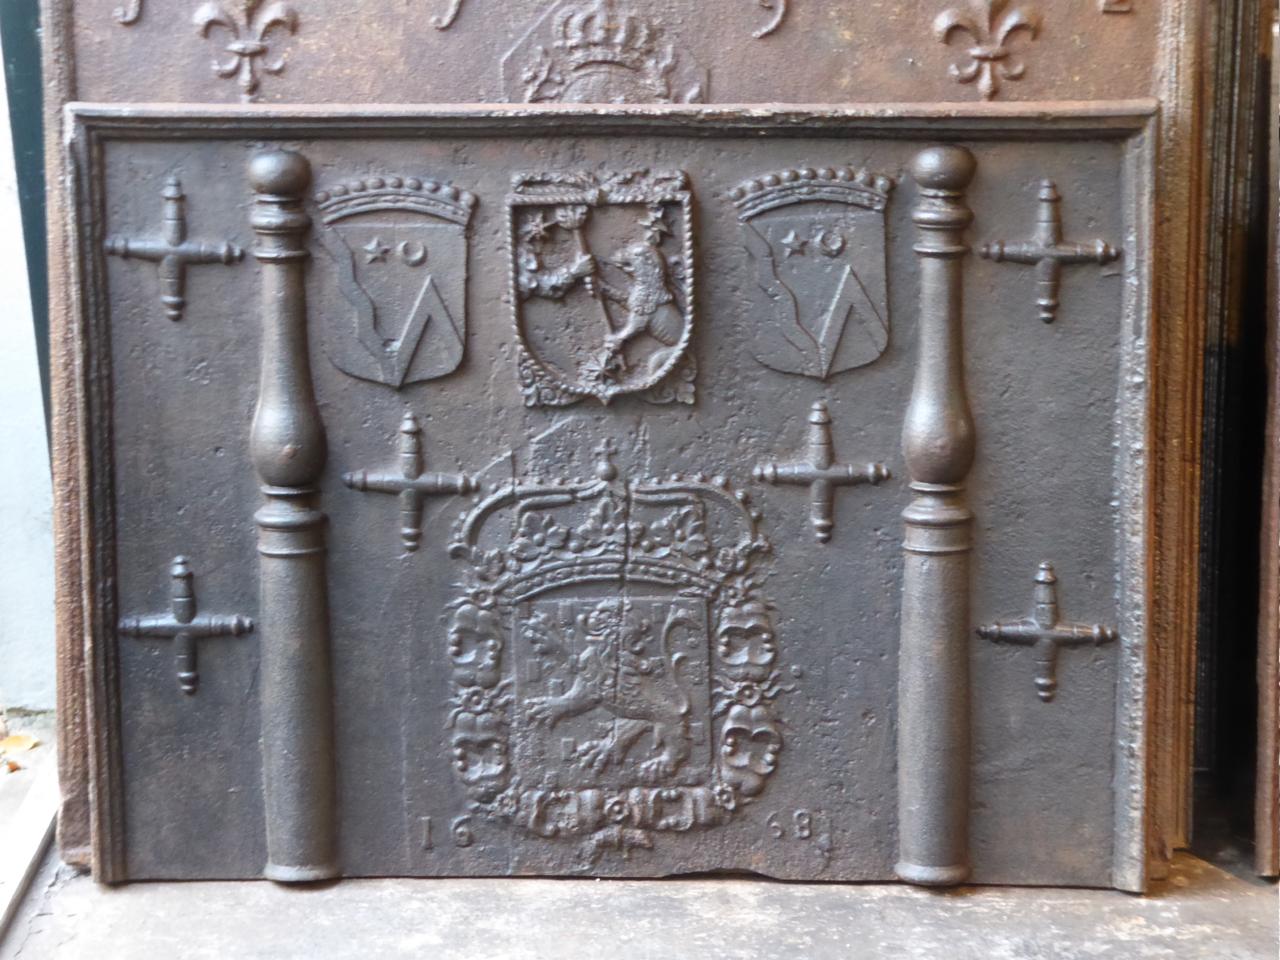 Magnificent 17th century French Louis XIV fireback with a coat of arms and two pillars of Hercules. The pillars stand for the club of Hercules and symbolize strength. The fireback is made of cast iron and has a natural brown patina. Upon request the